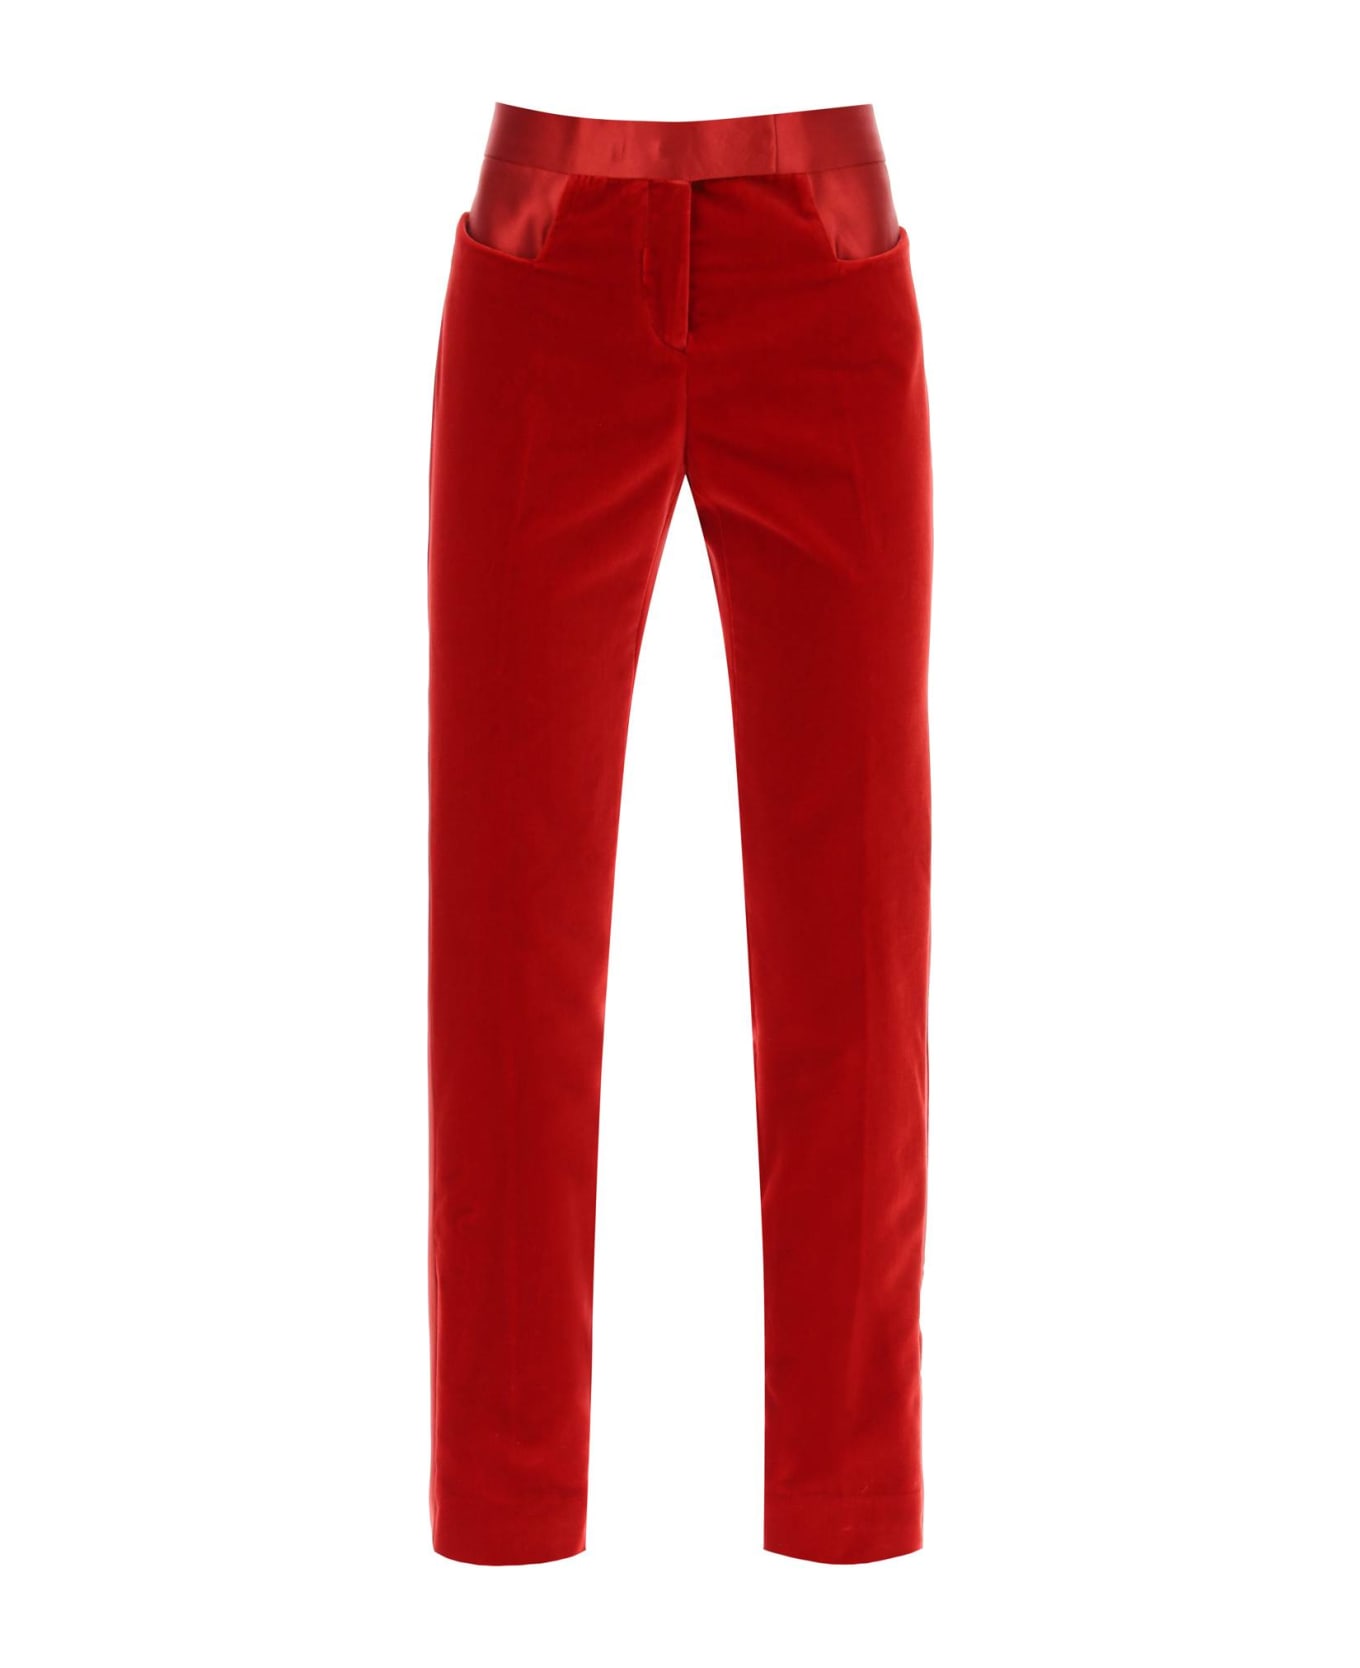 Tom Ford Velvet Pants With Satin Bands - RED (Red) ボトムス